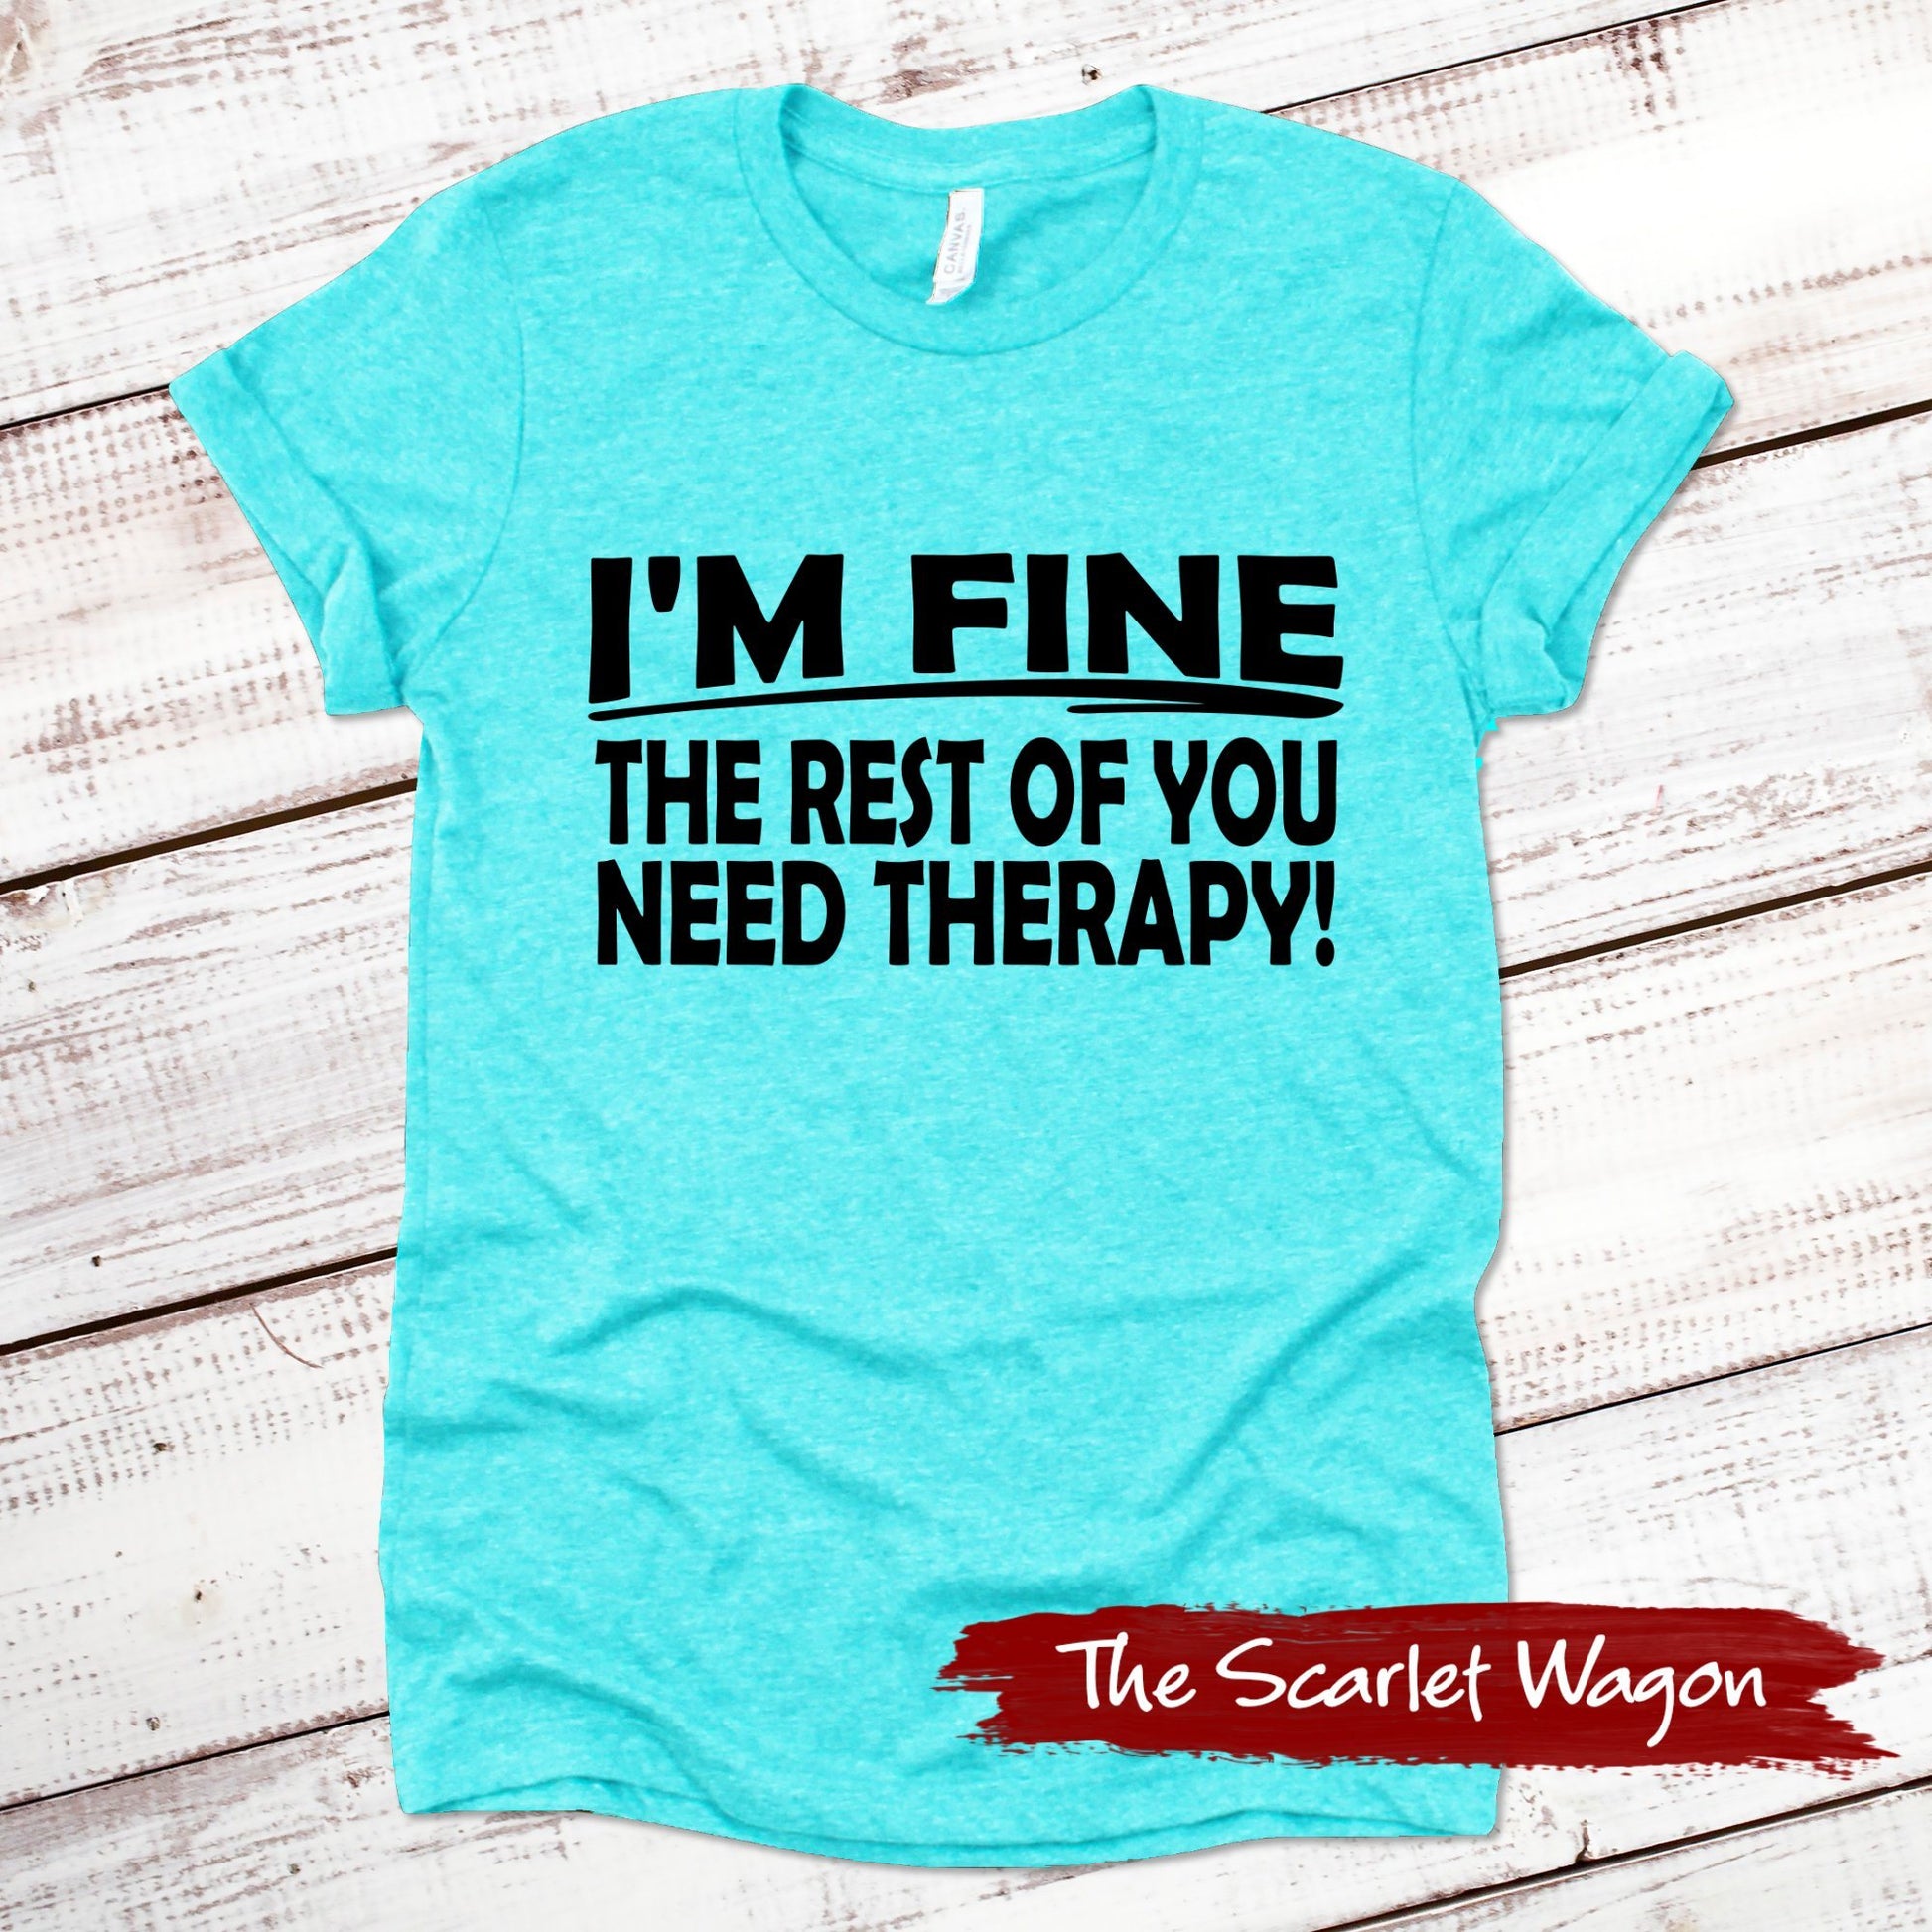 I'm Fine the Rest of You Need Therapy Funny Shirt Scarlet Wagon Heather Teal XS 